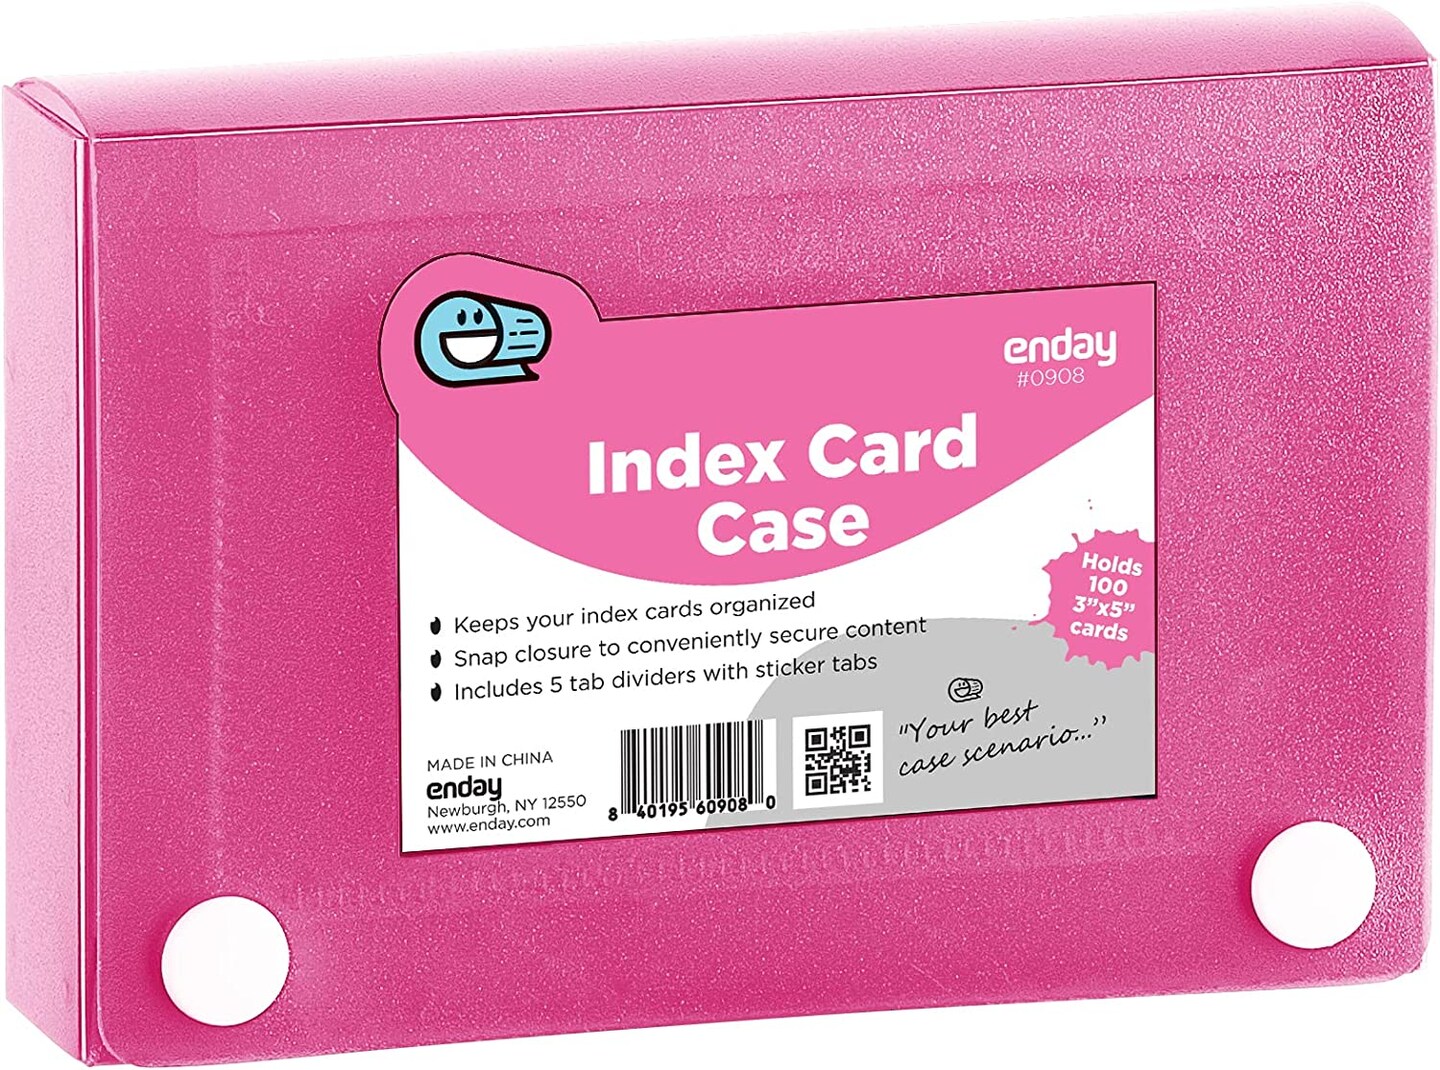 enday-3-x-5-index-card-case-holds-5-tab-dividers-michaels